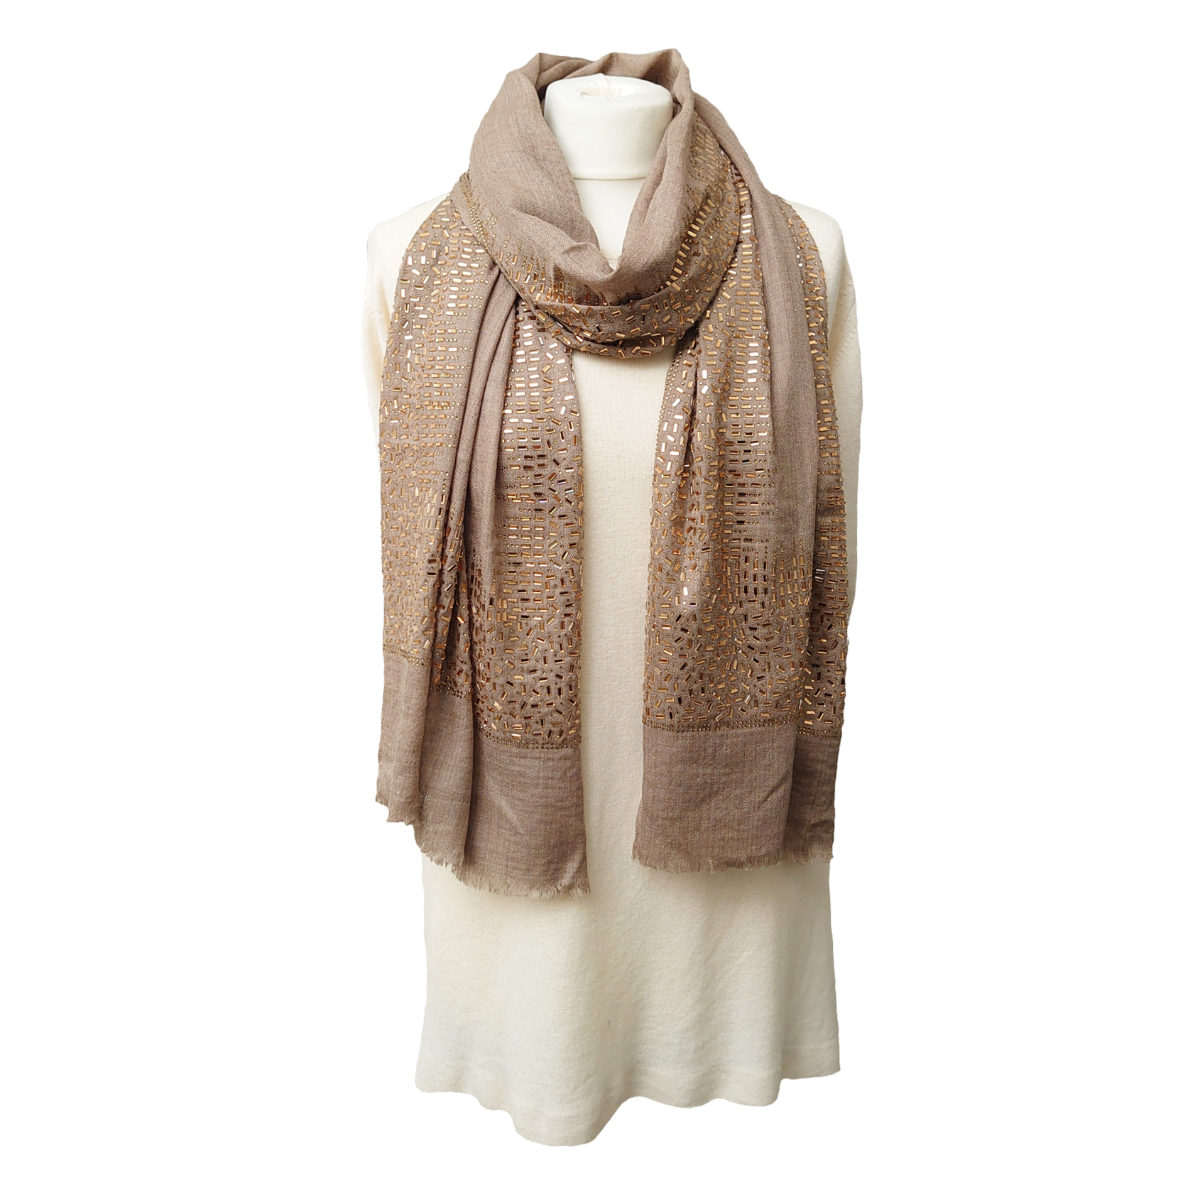 Exclusive, Limited Edition Stole With Crystals - Taupe-Gold